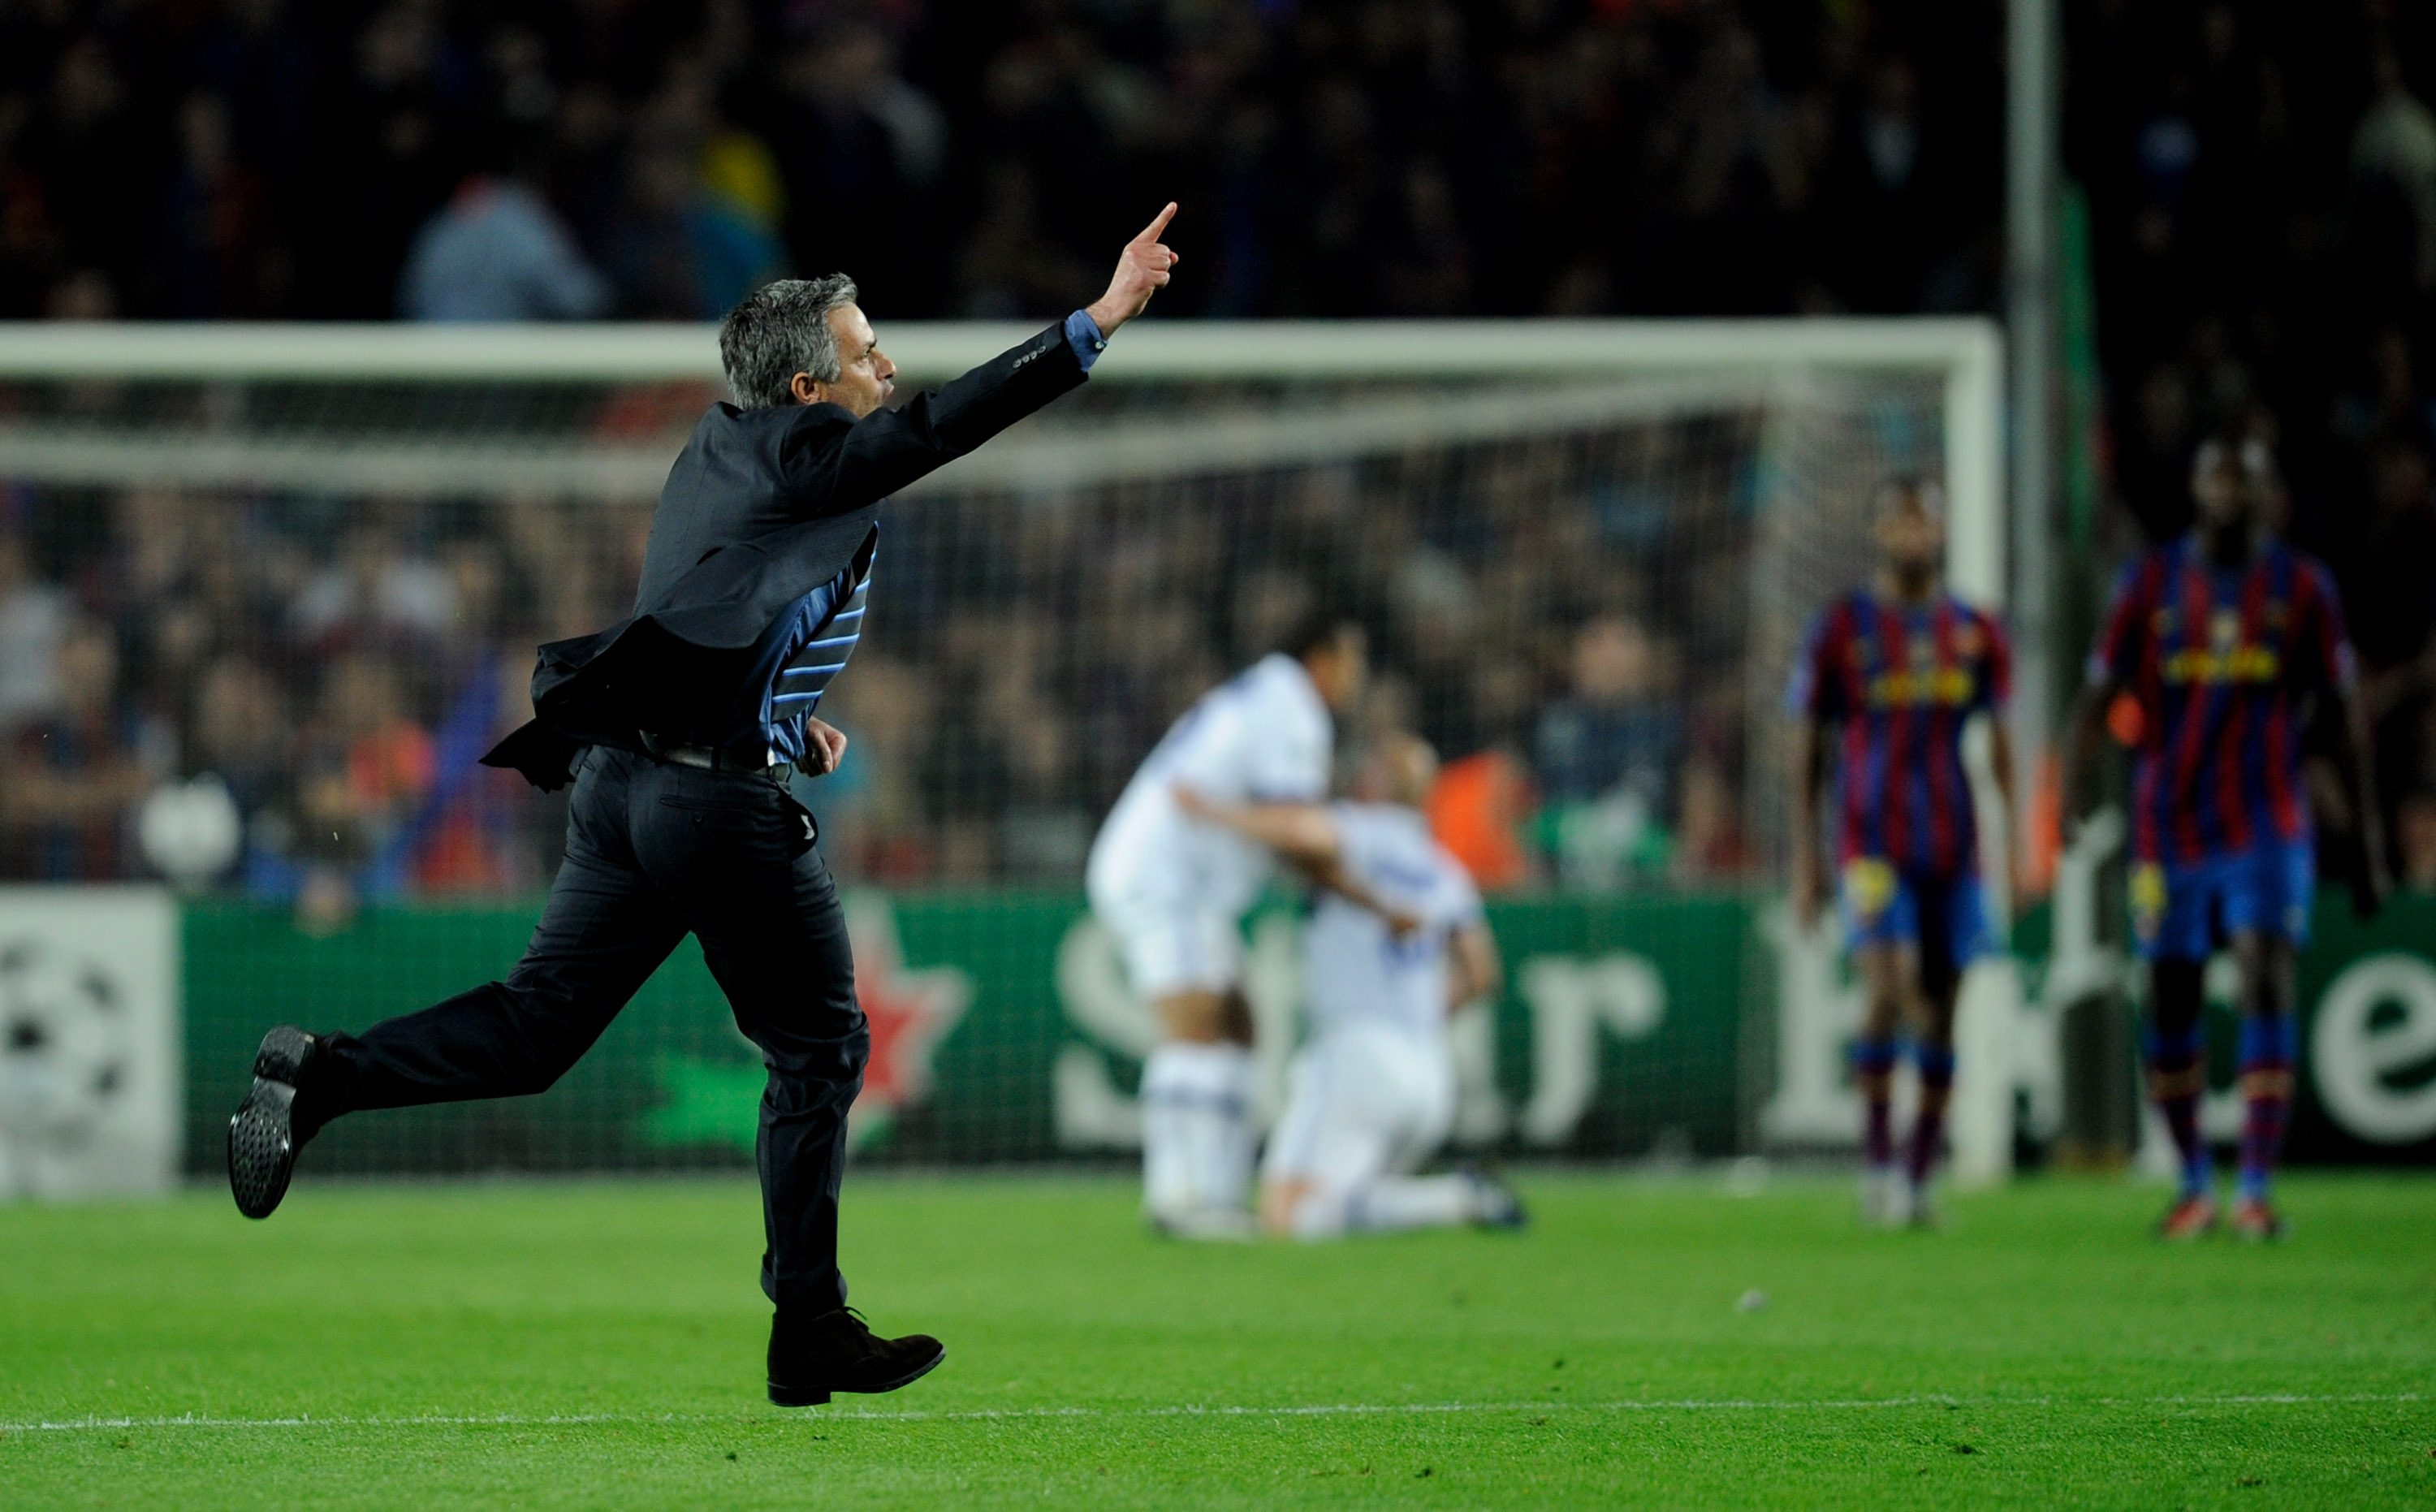 BARCELONA, SPAIN - APRIL 28: Inter Milan manager Jose Mourinho celebrates on the final whistle after the UEFA Champions League Semi Final Second Leg match between Barcelona and Inter Milan at Camp Nou on April 28, 2010 in Barcelona, Spain.  (Photo by Mich